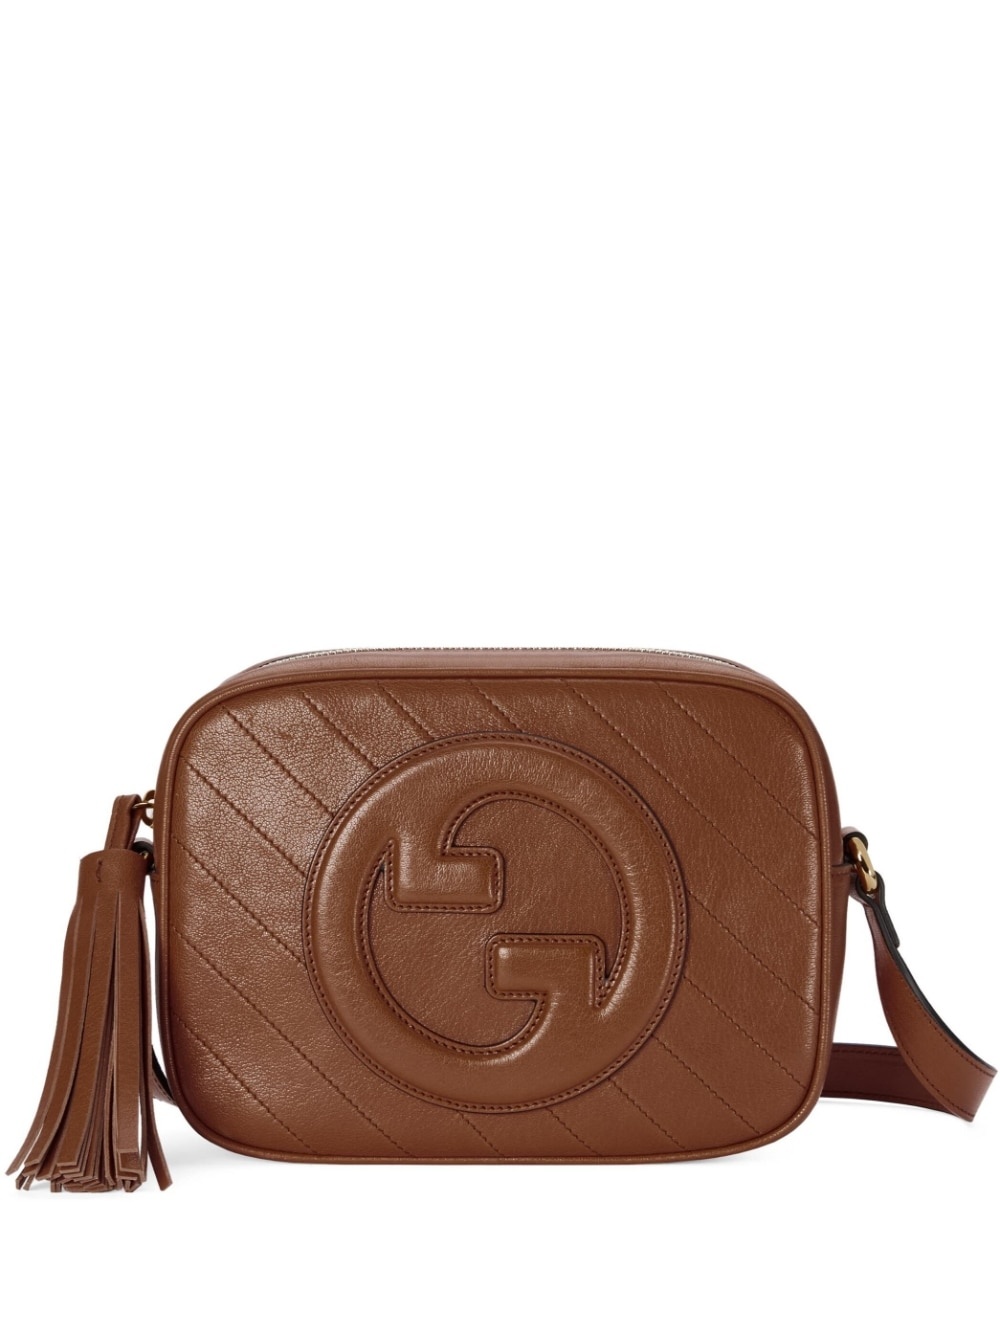 Gucci blondie small leather shoulder bag - 1